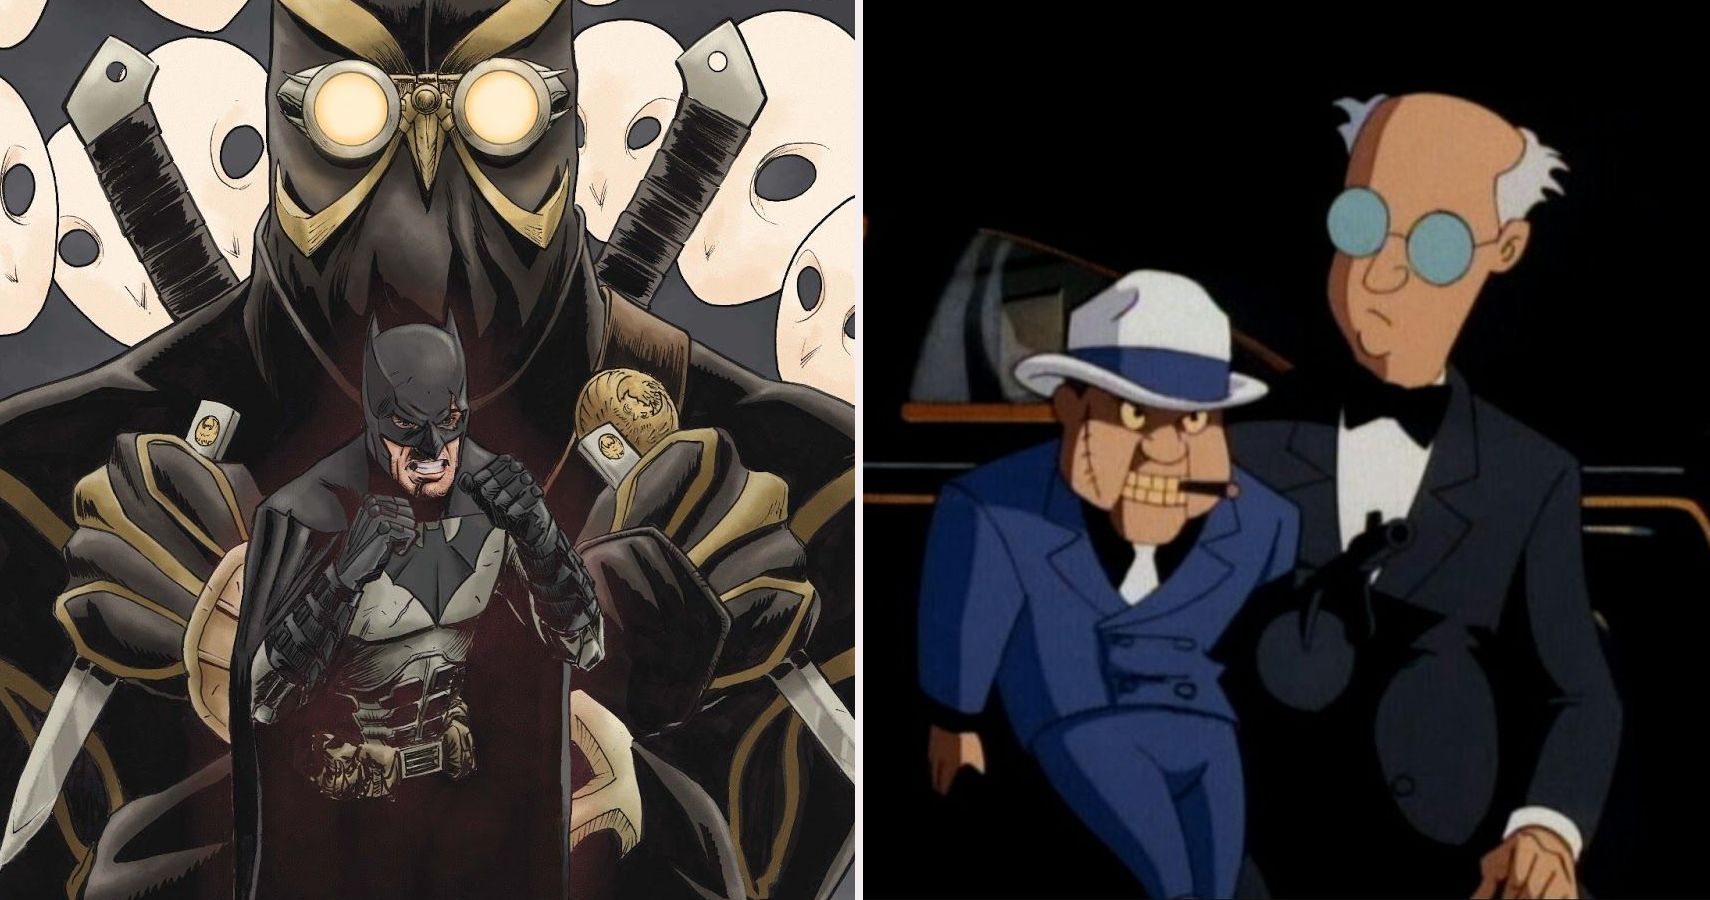 10 Previously Unseen Batman Villains Who Deserve To Appear In A Movie